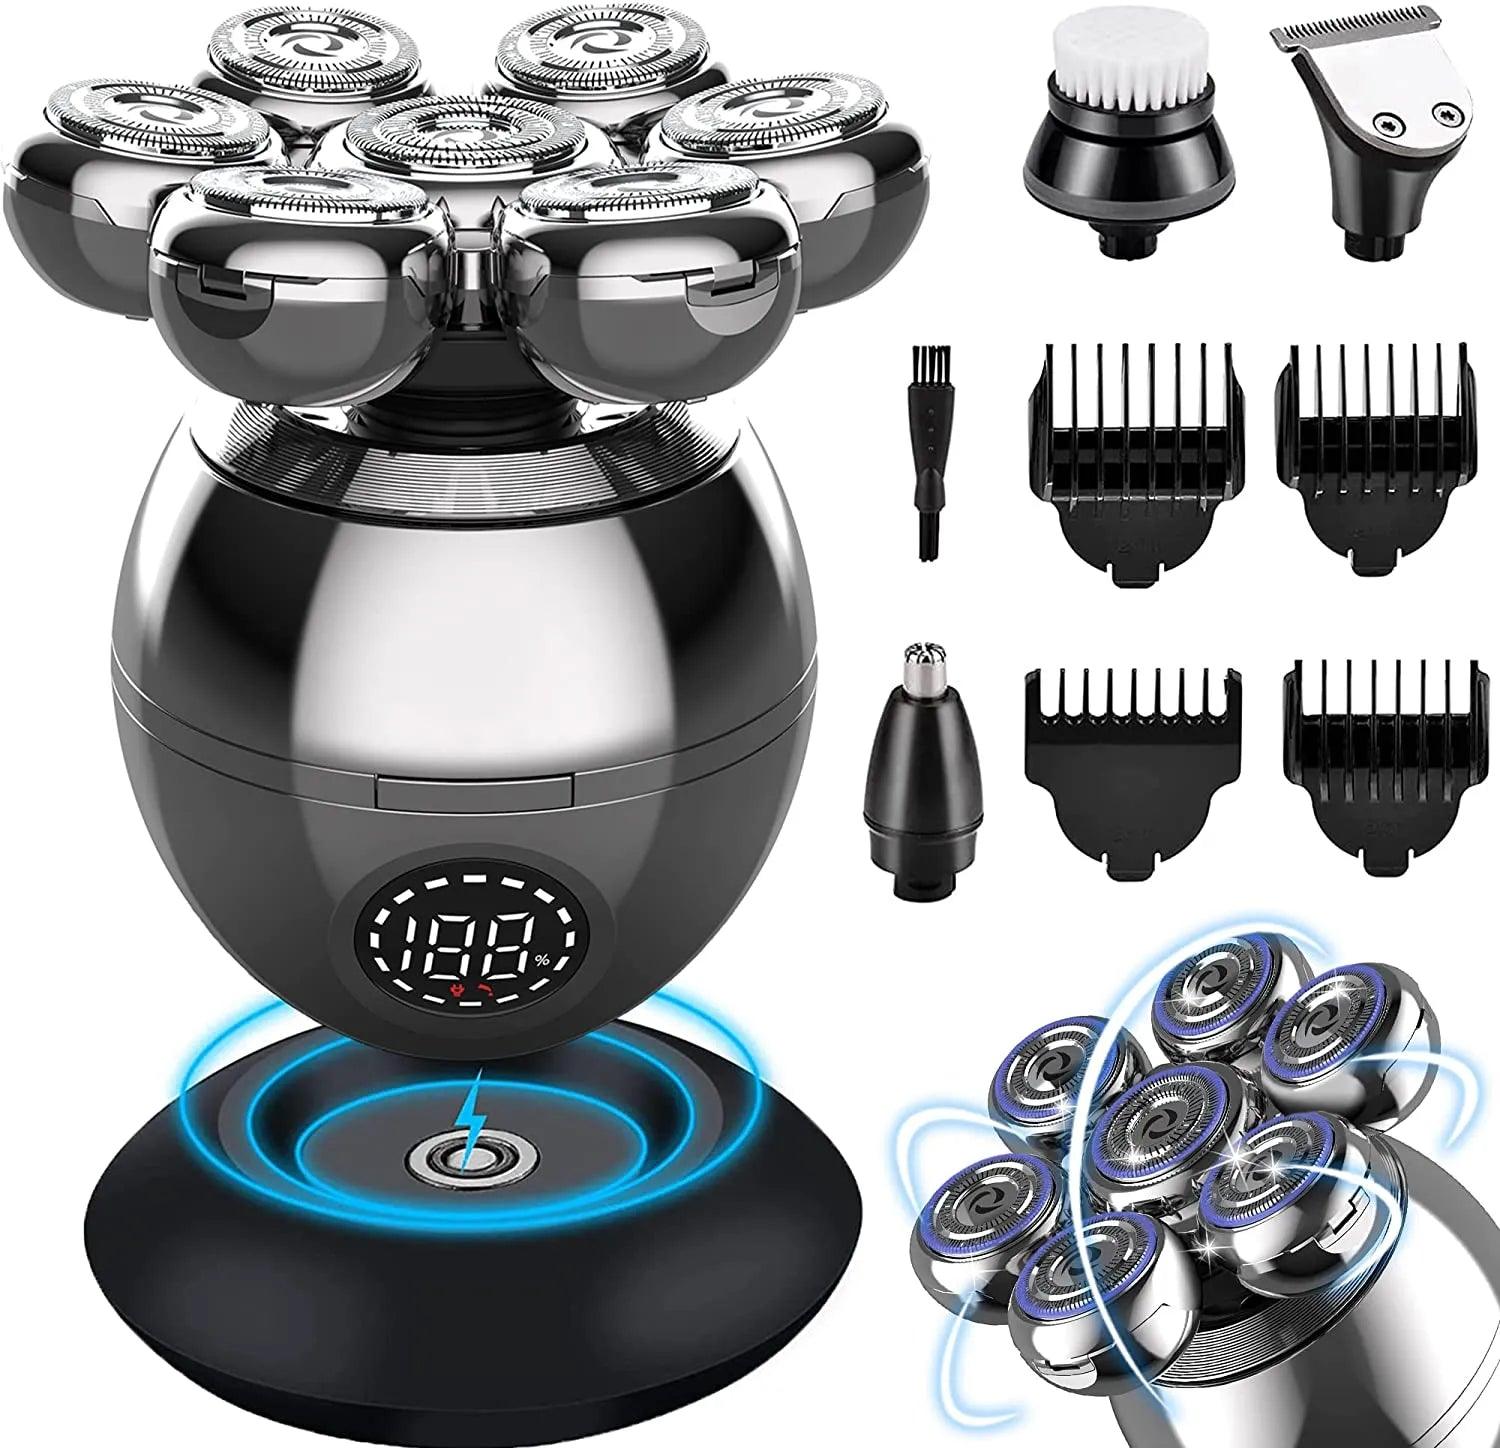 7D Floating Cutter Electric Shaver Kit for Men - Waterproof Beard and Skull Shaver with Multiple Attachments  ourlum.com   